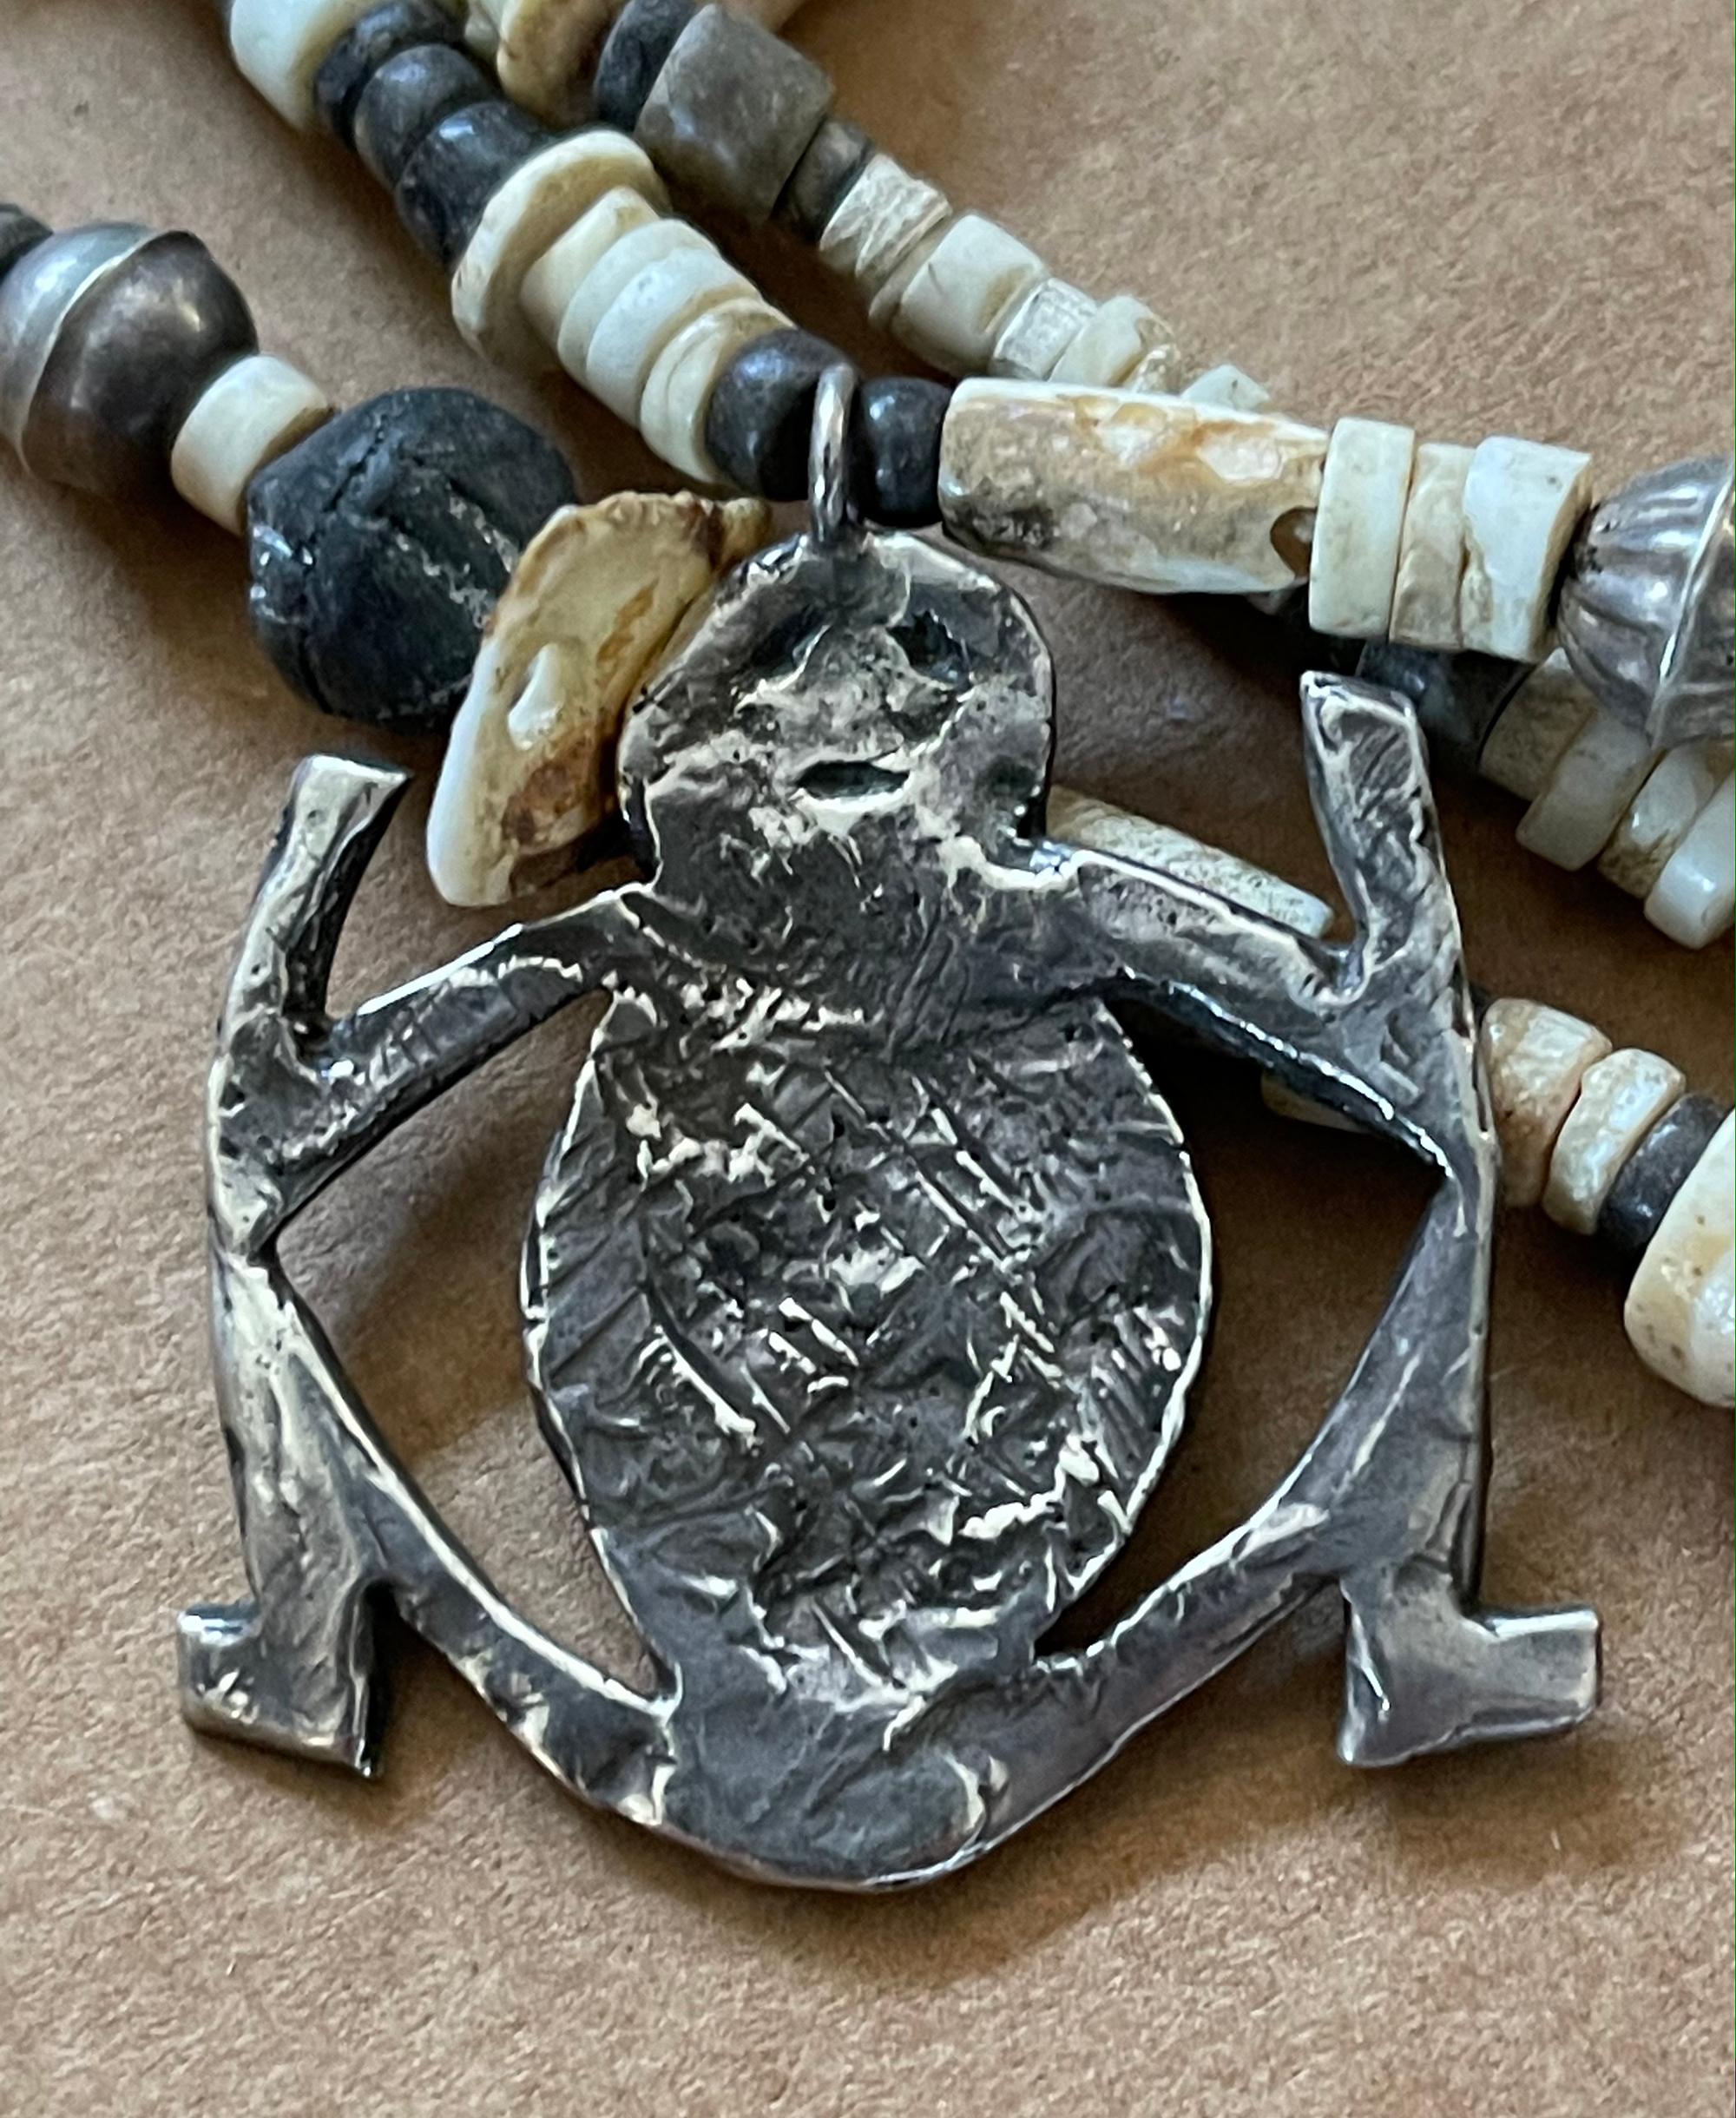 Vintage Bead and Silver Tribal Pendant Necklace by Annette Bird '1925-2016' In Good Condition For Sale In Point Richmond, CA